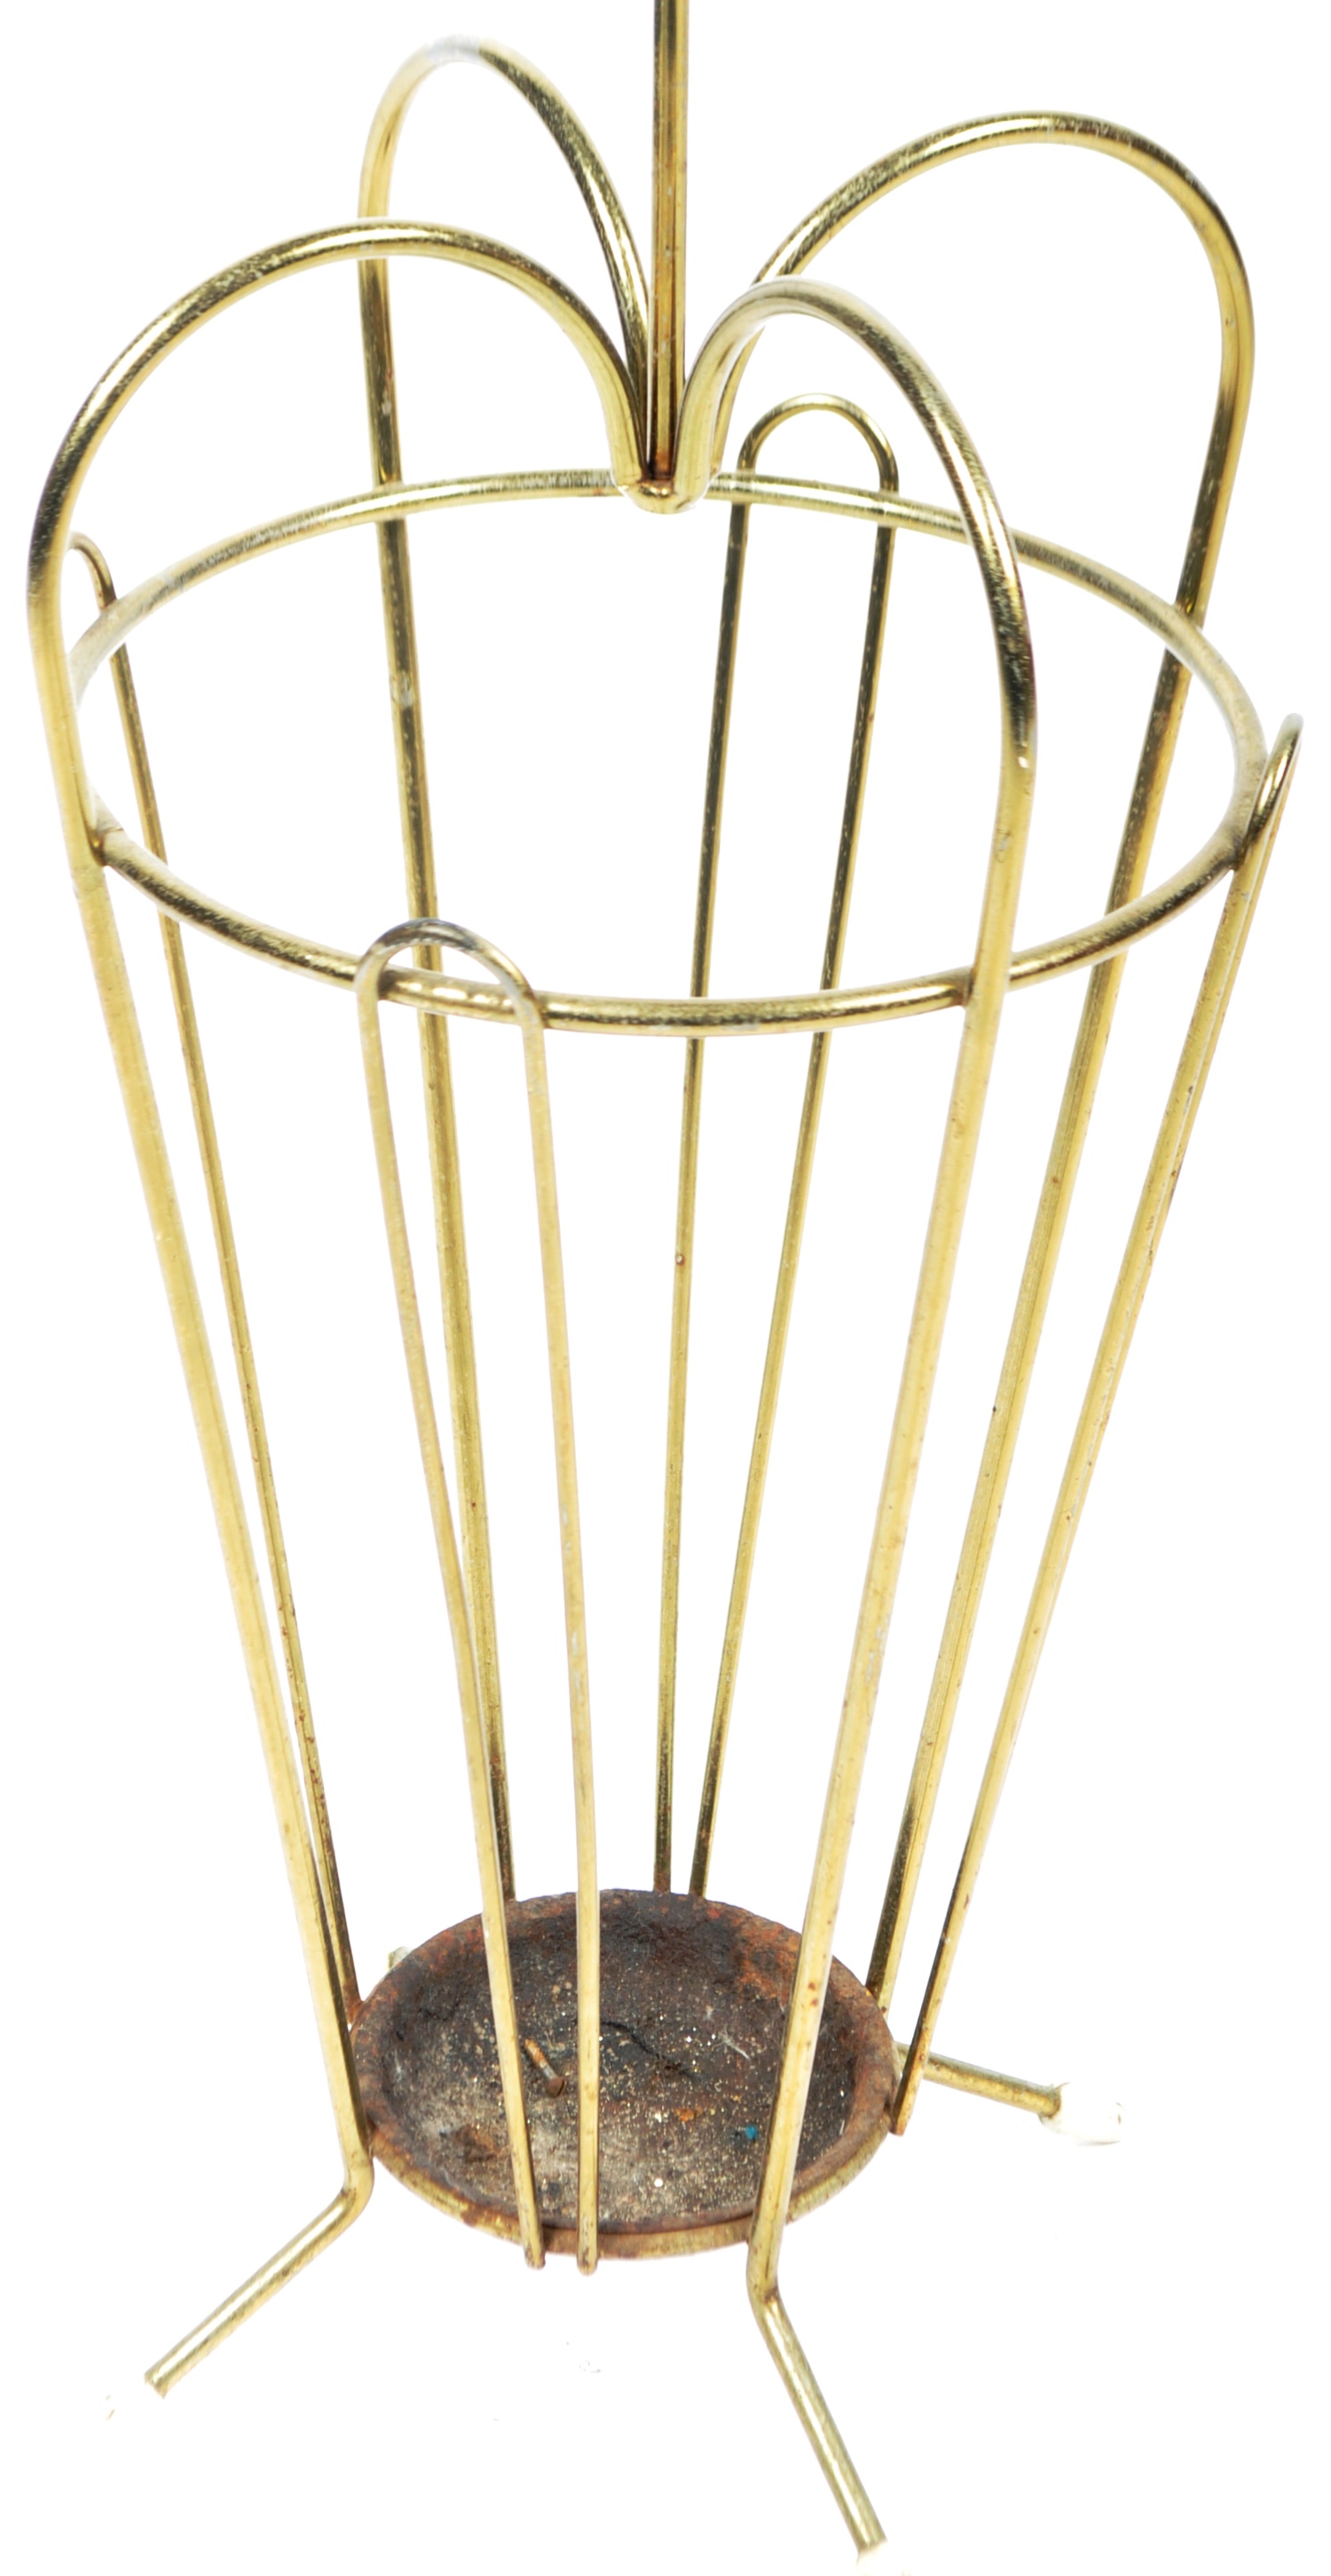 RETRO 20TH CENTURY BRASS WORKED STICKSTAND IN THE FORM OF AN UMBRELLA - Image 2 of 3